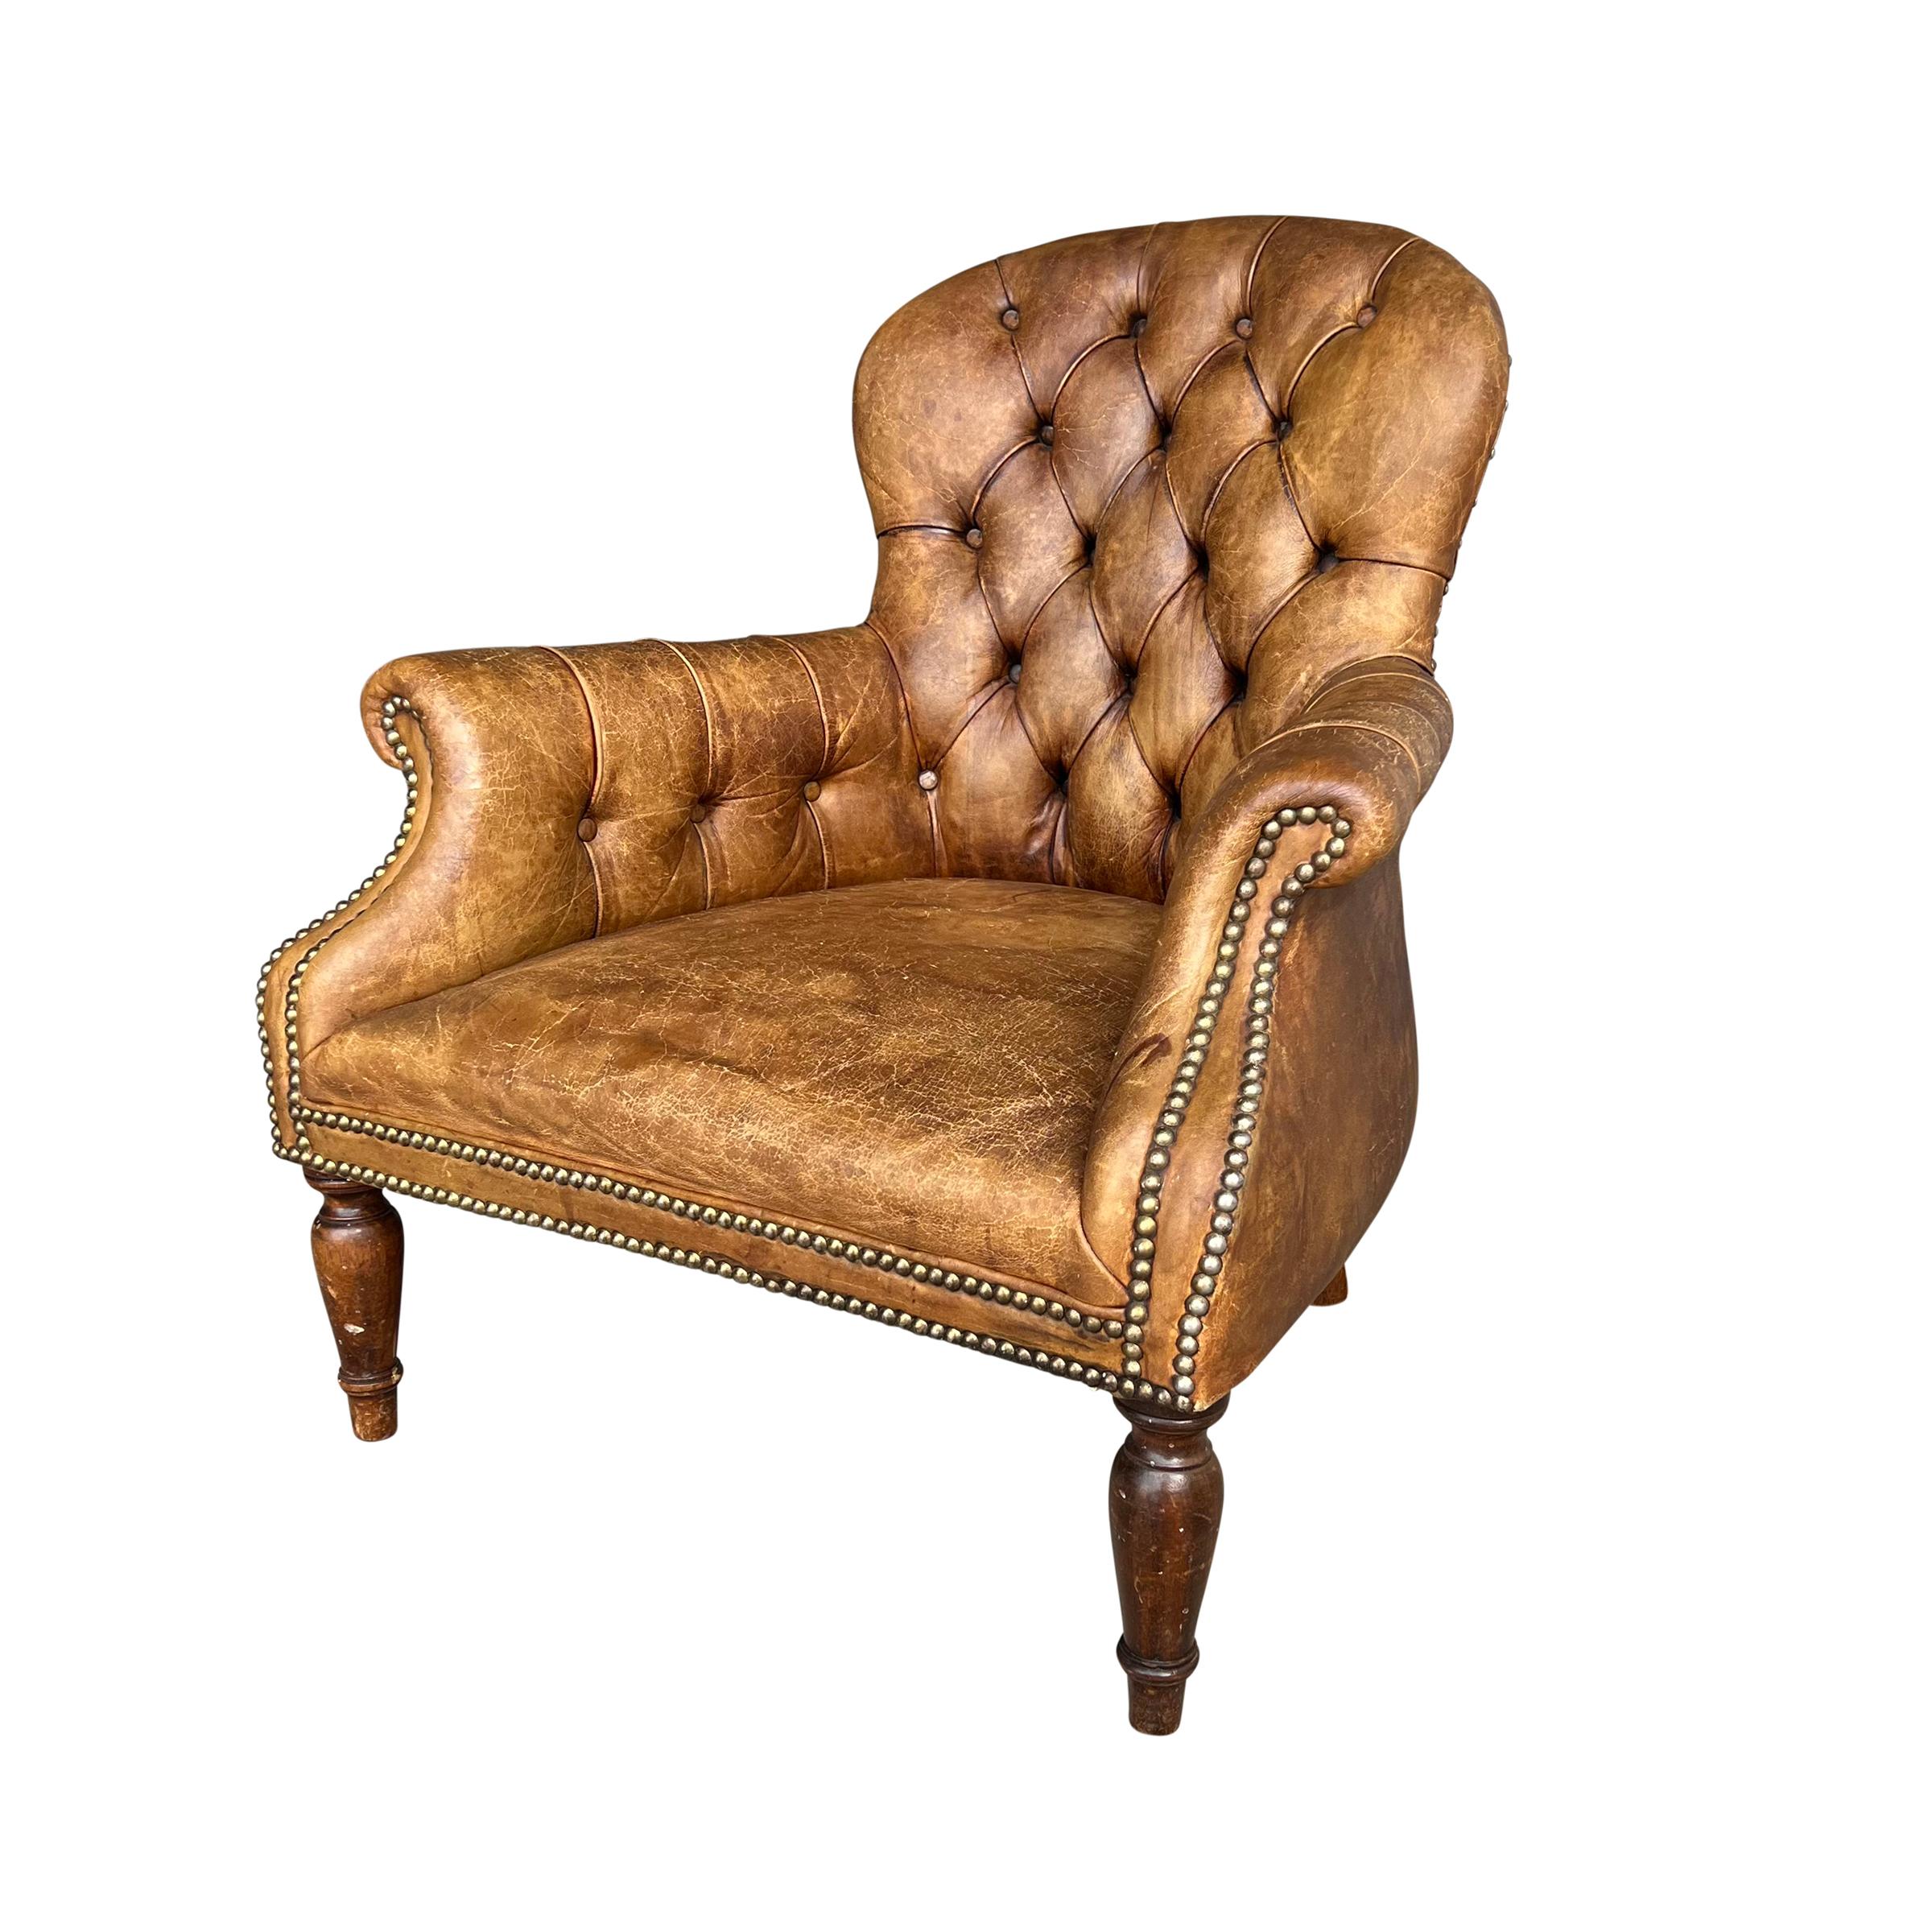 Early 20th Century French Napoleon III-Style Chair 2